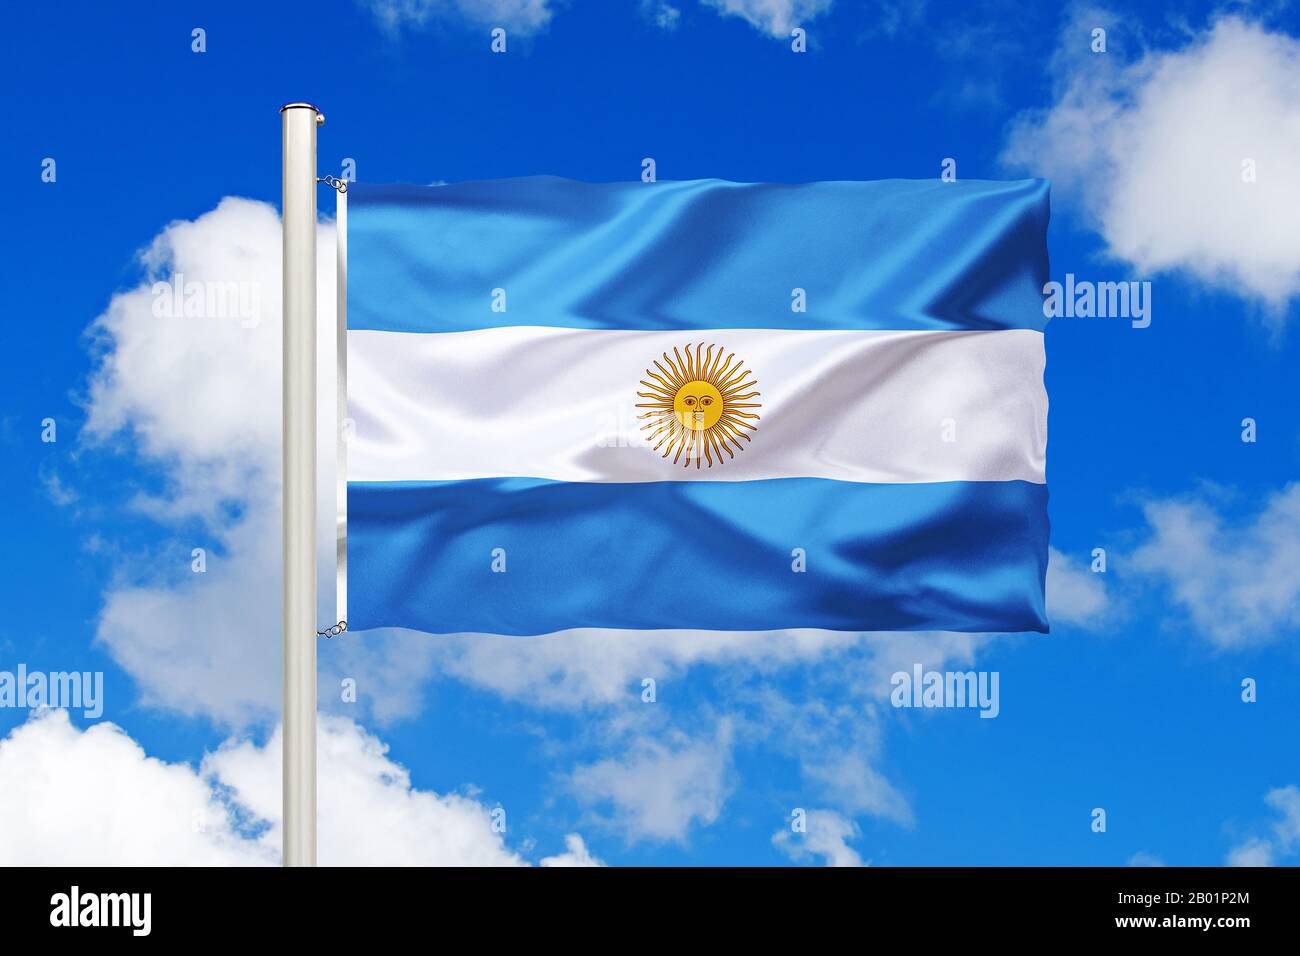 flag of Argentina in front of blue cloudy sky, Argentina Stock Photo